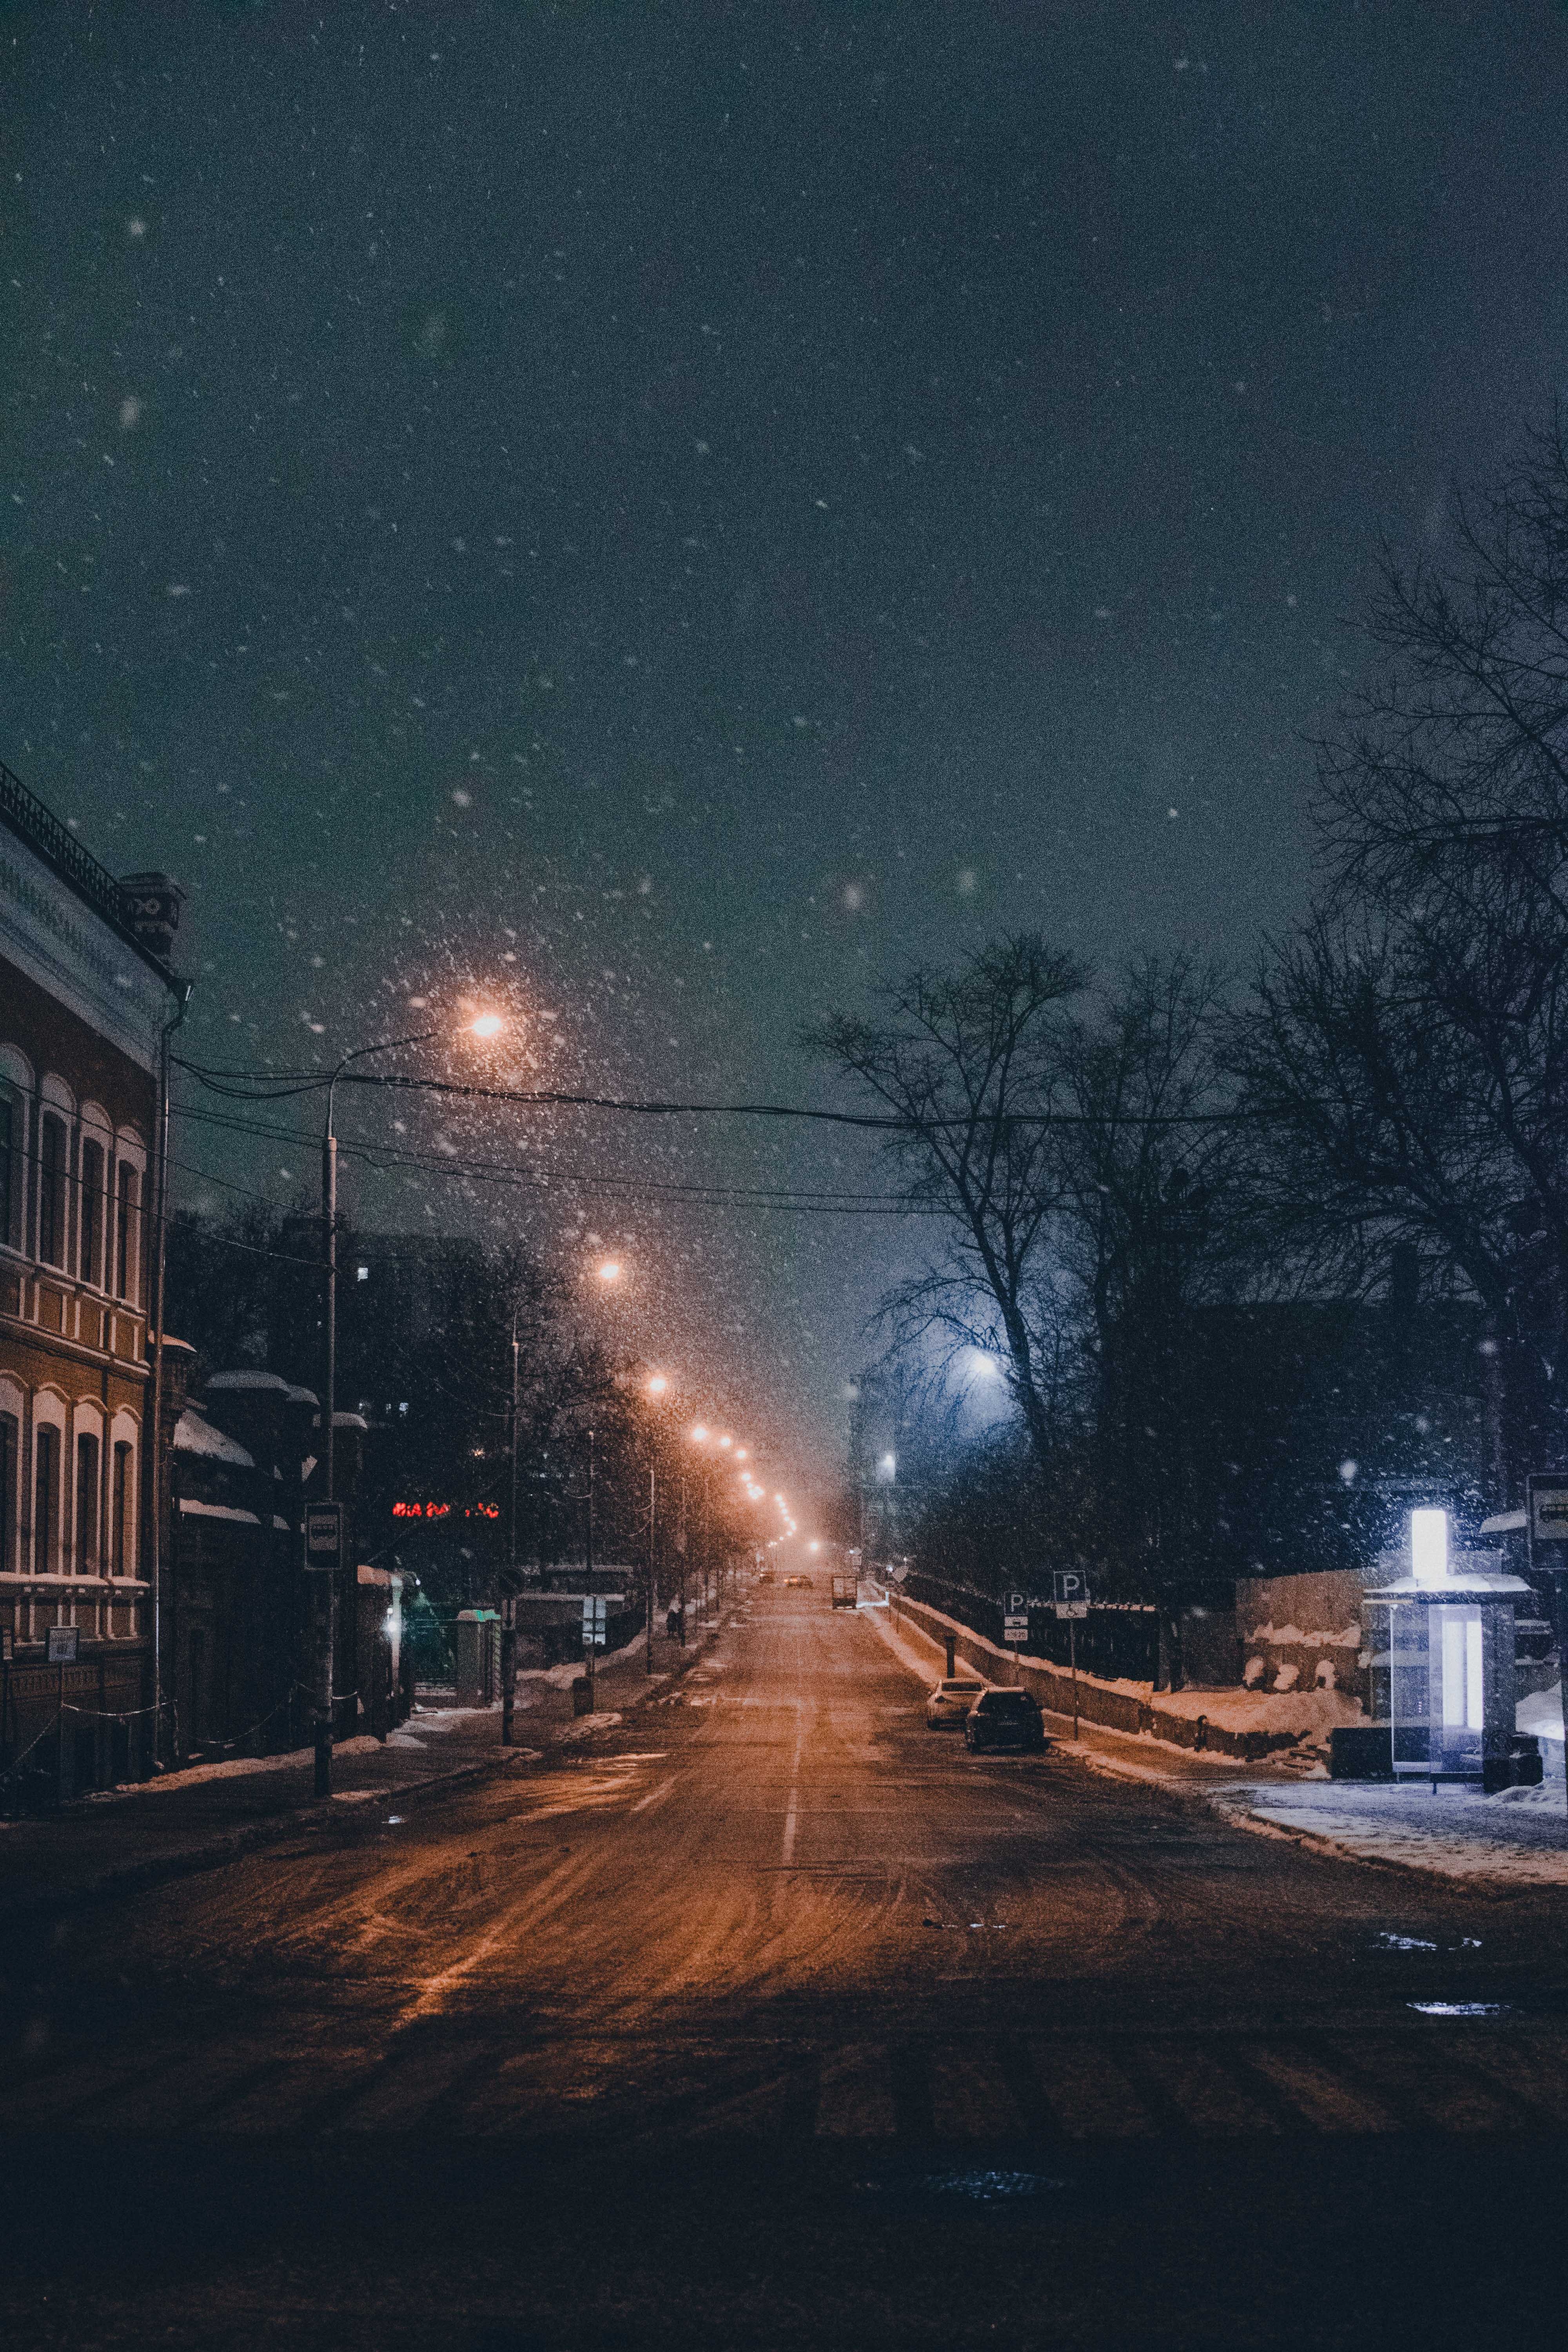 91251 download wallpaper cities, winter, twilight, road, night city, dusk, snowfall screensavers and pictures for free